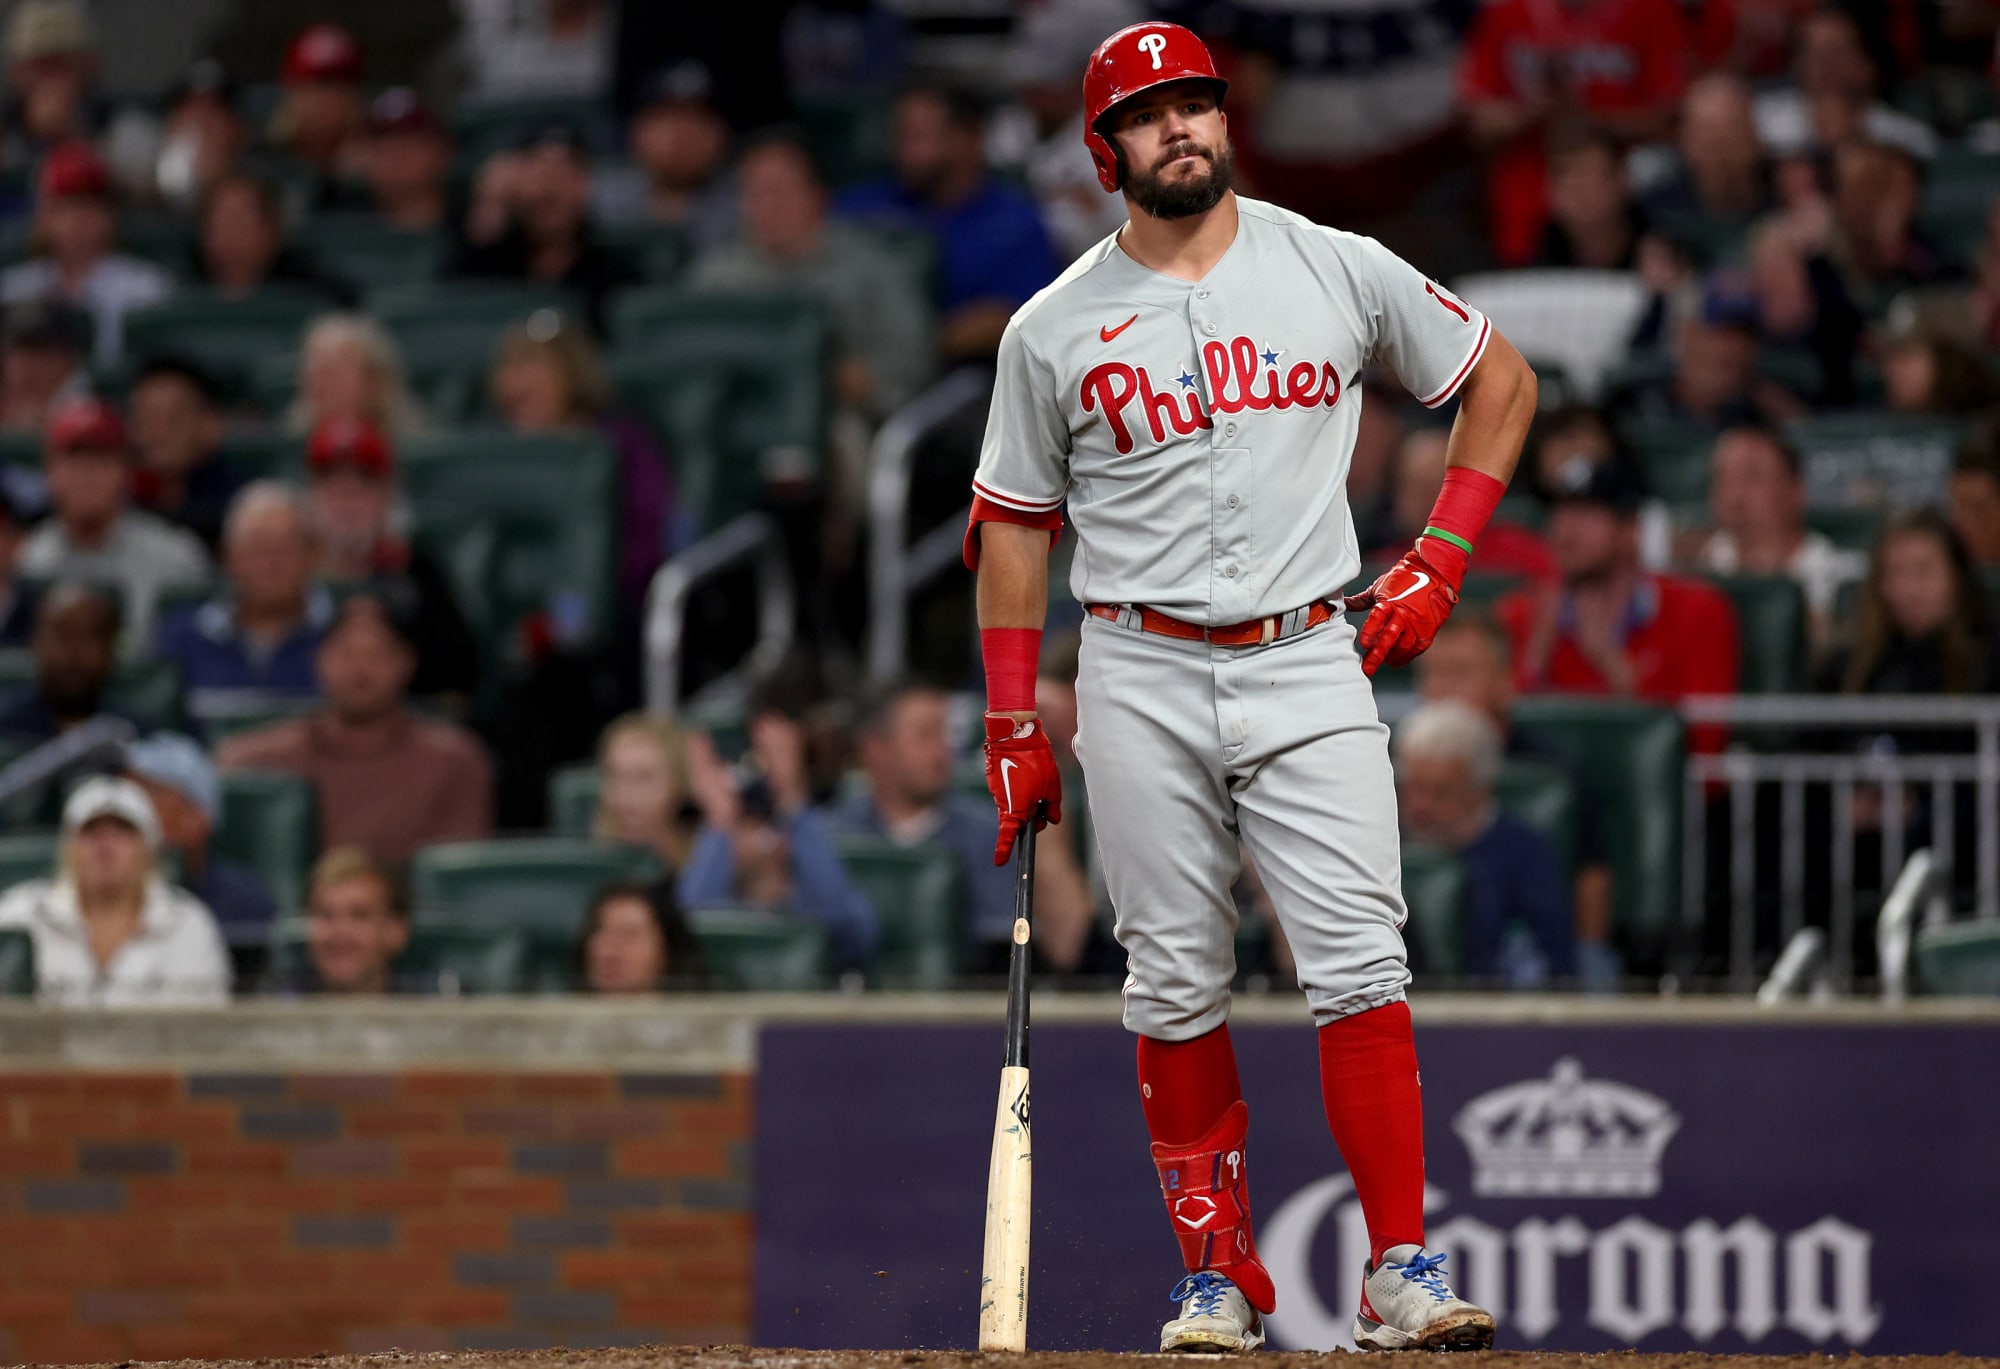 Kyle Schwarber, Rhys Hoskins know they have to hit for Phillies to